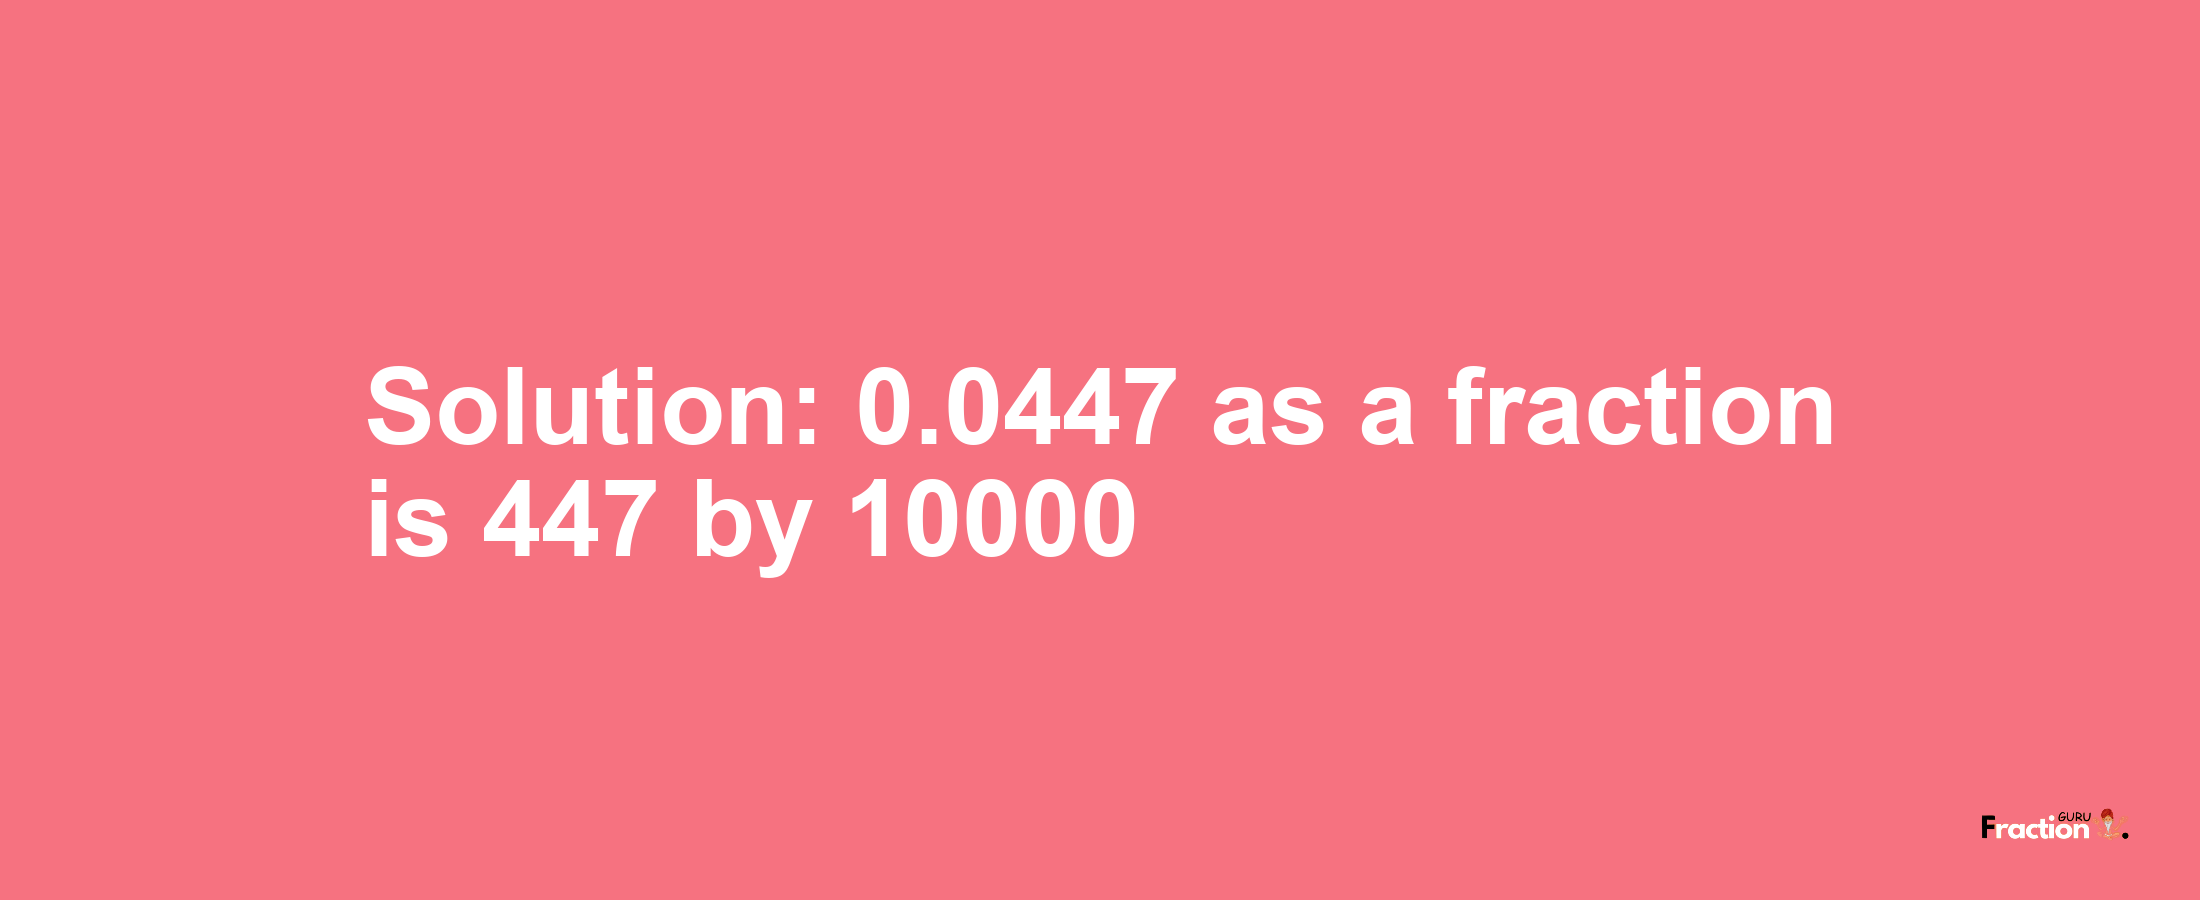 Solution:0.0447 as a fraction is 447/10000